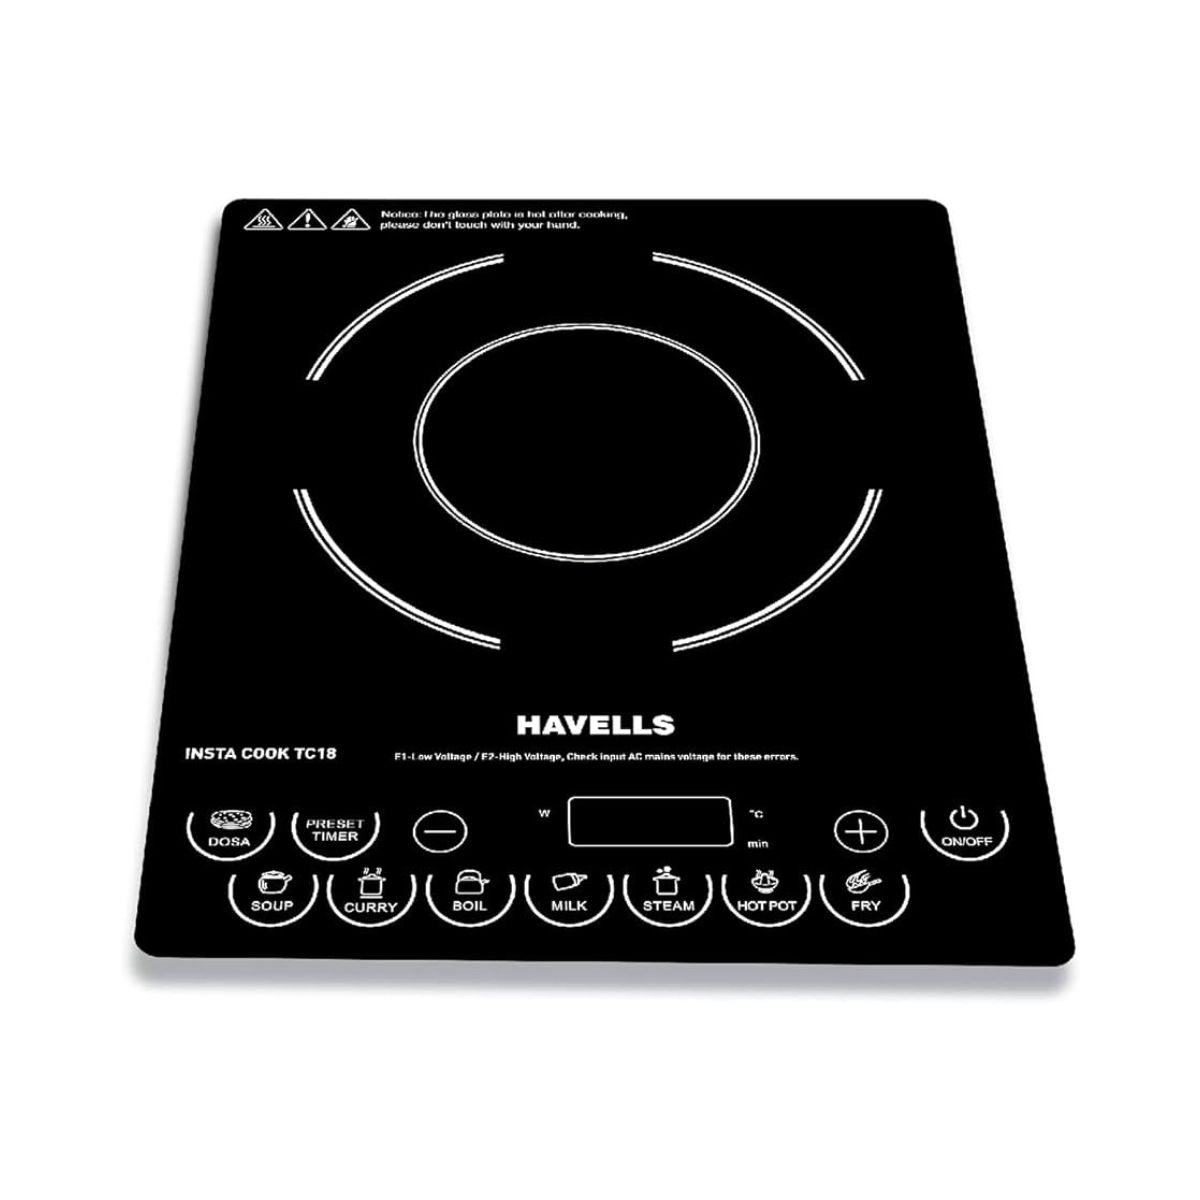 Havells Induction Cooktop TC - 1800W